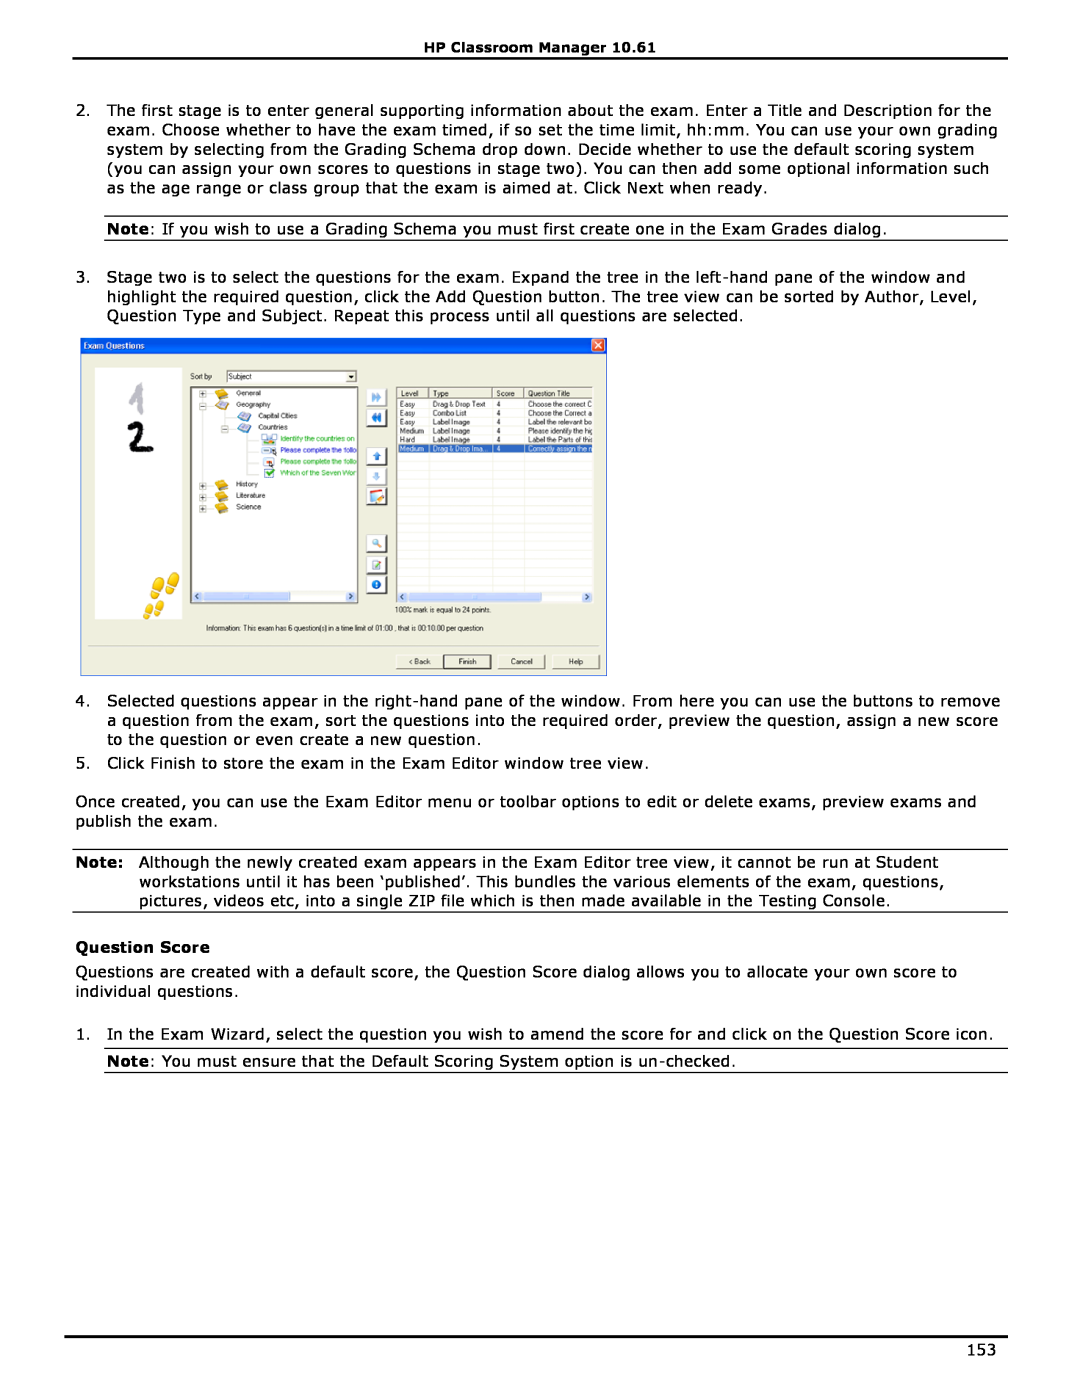 HP Classroom Manager manual Question Score 